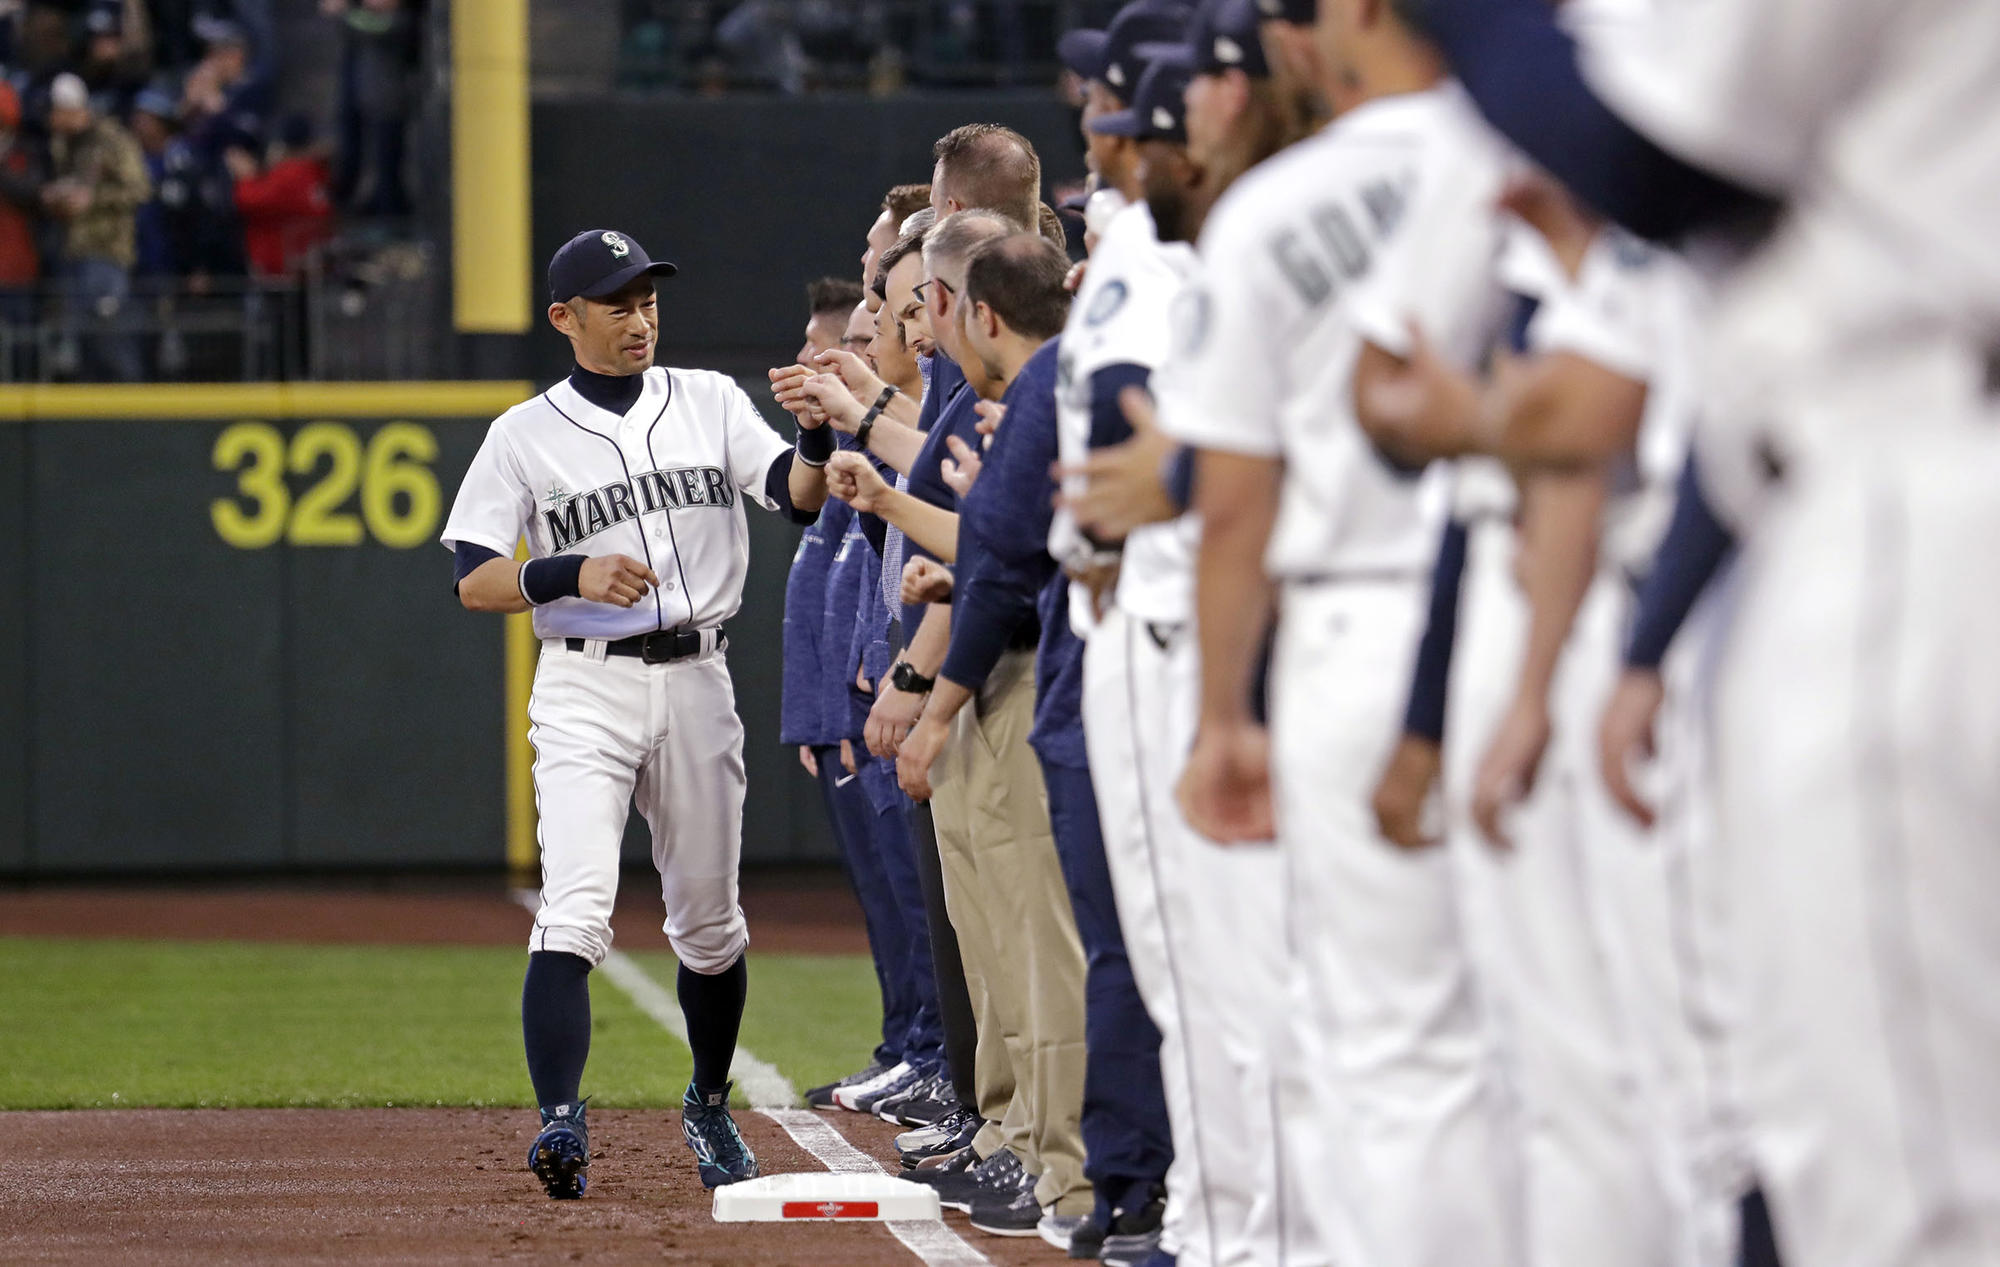 Ichiro gracefully exits the field. Now what?